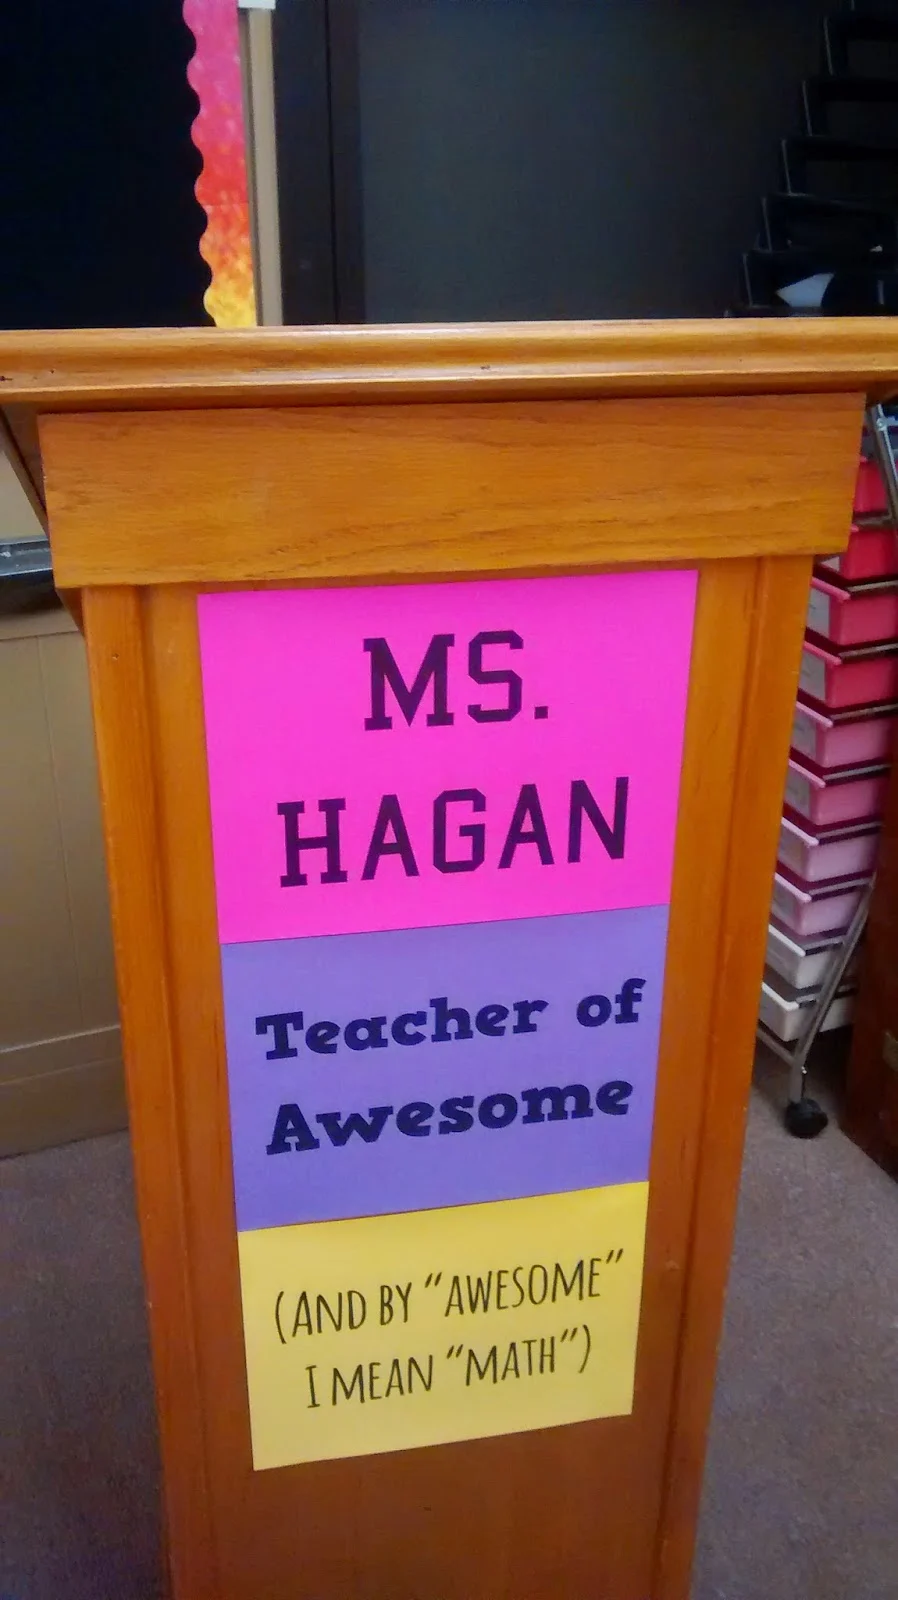 Teacher of awesome poster on podium